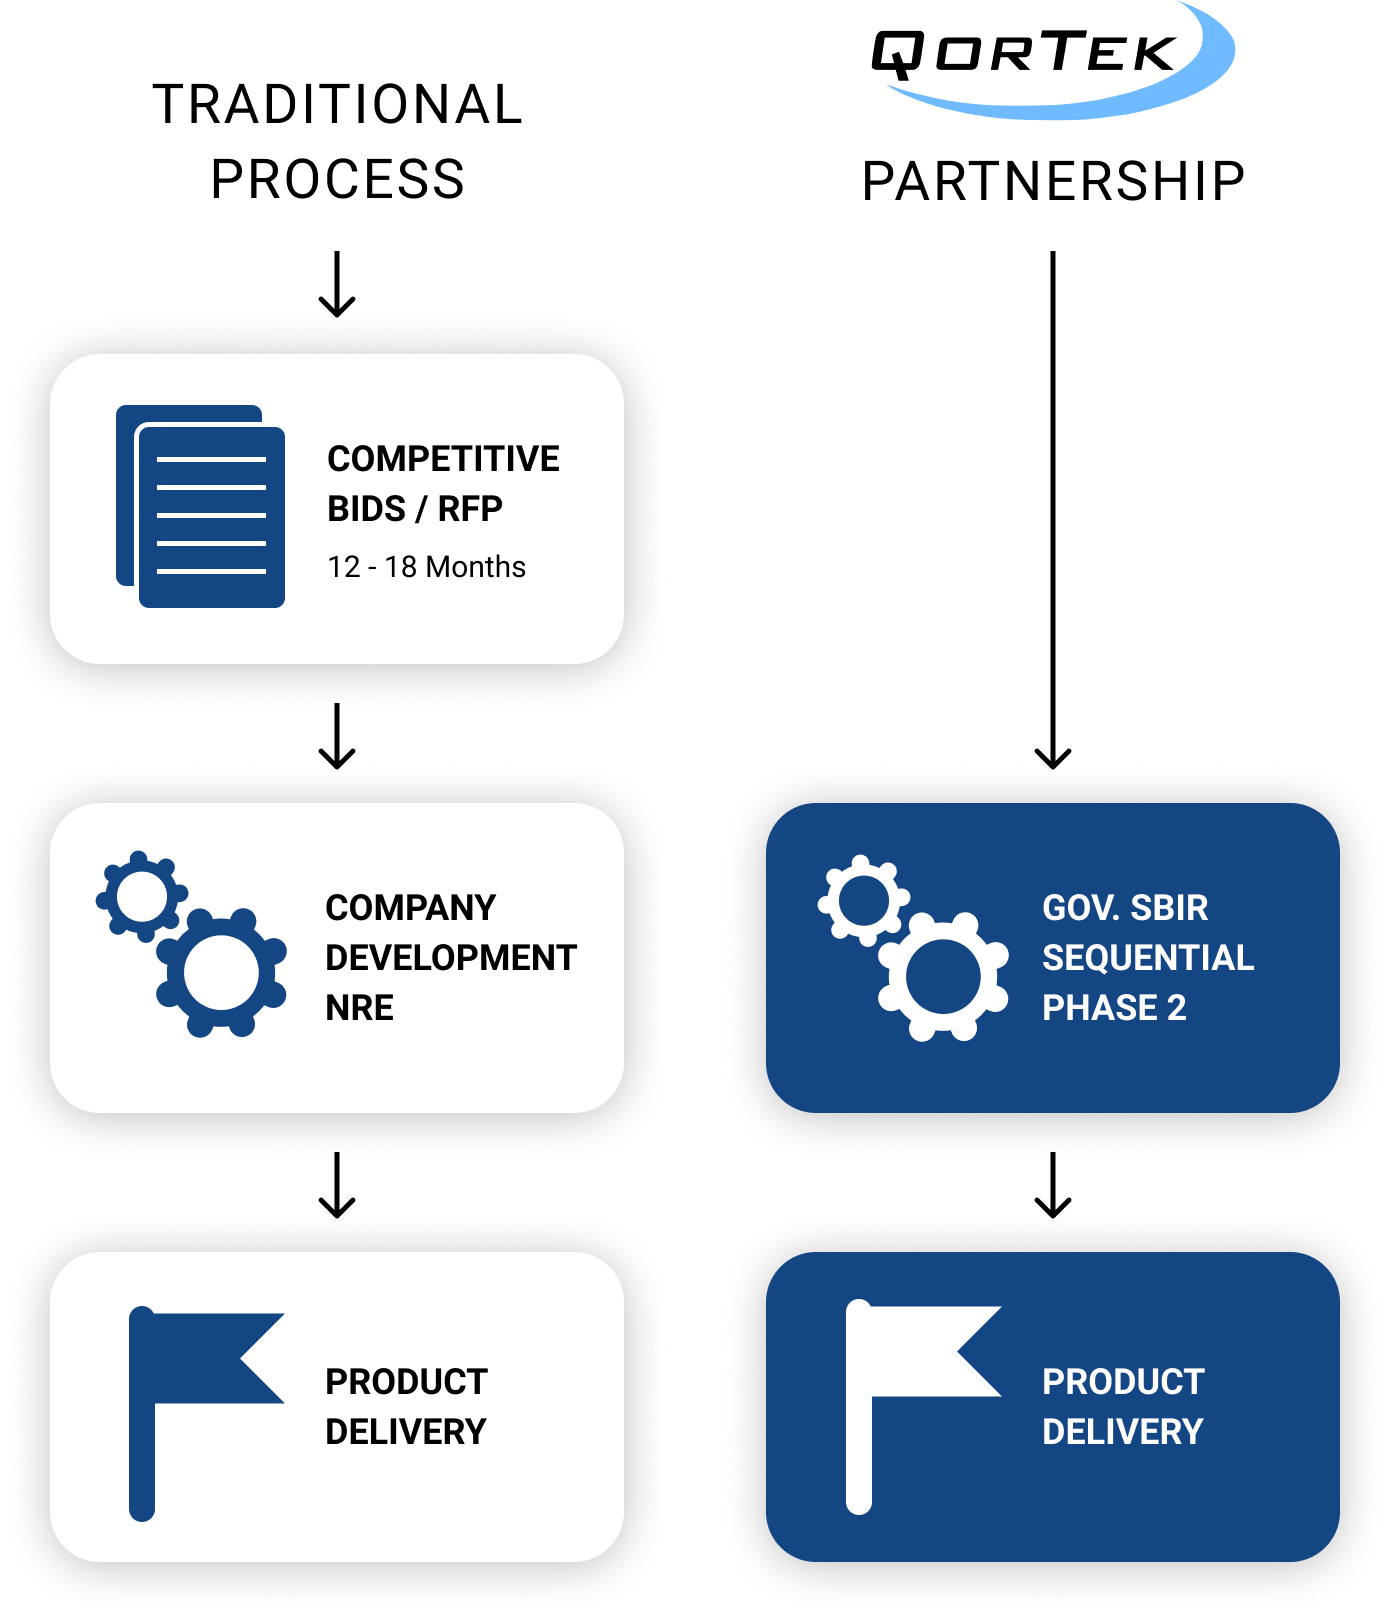 Infographic comparing the traditional funding process to a partnership with QorTek. By partnering with QorTek through a sequential phase 2 contract, companies can skip the competitive bids and RFP process. This saves them 12-18 months of their time.